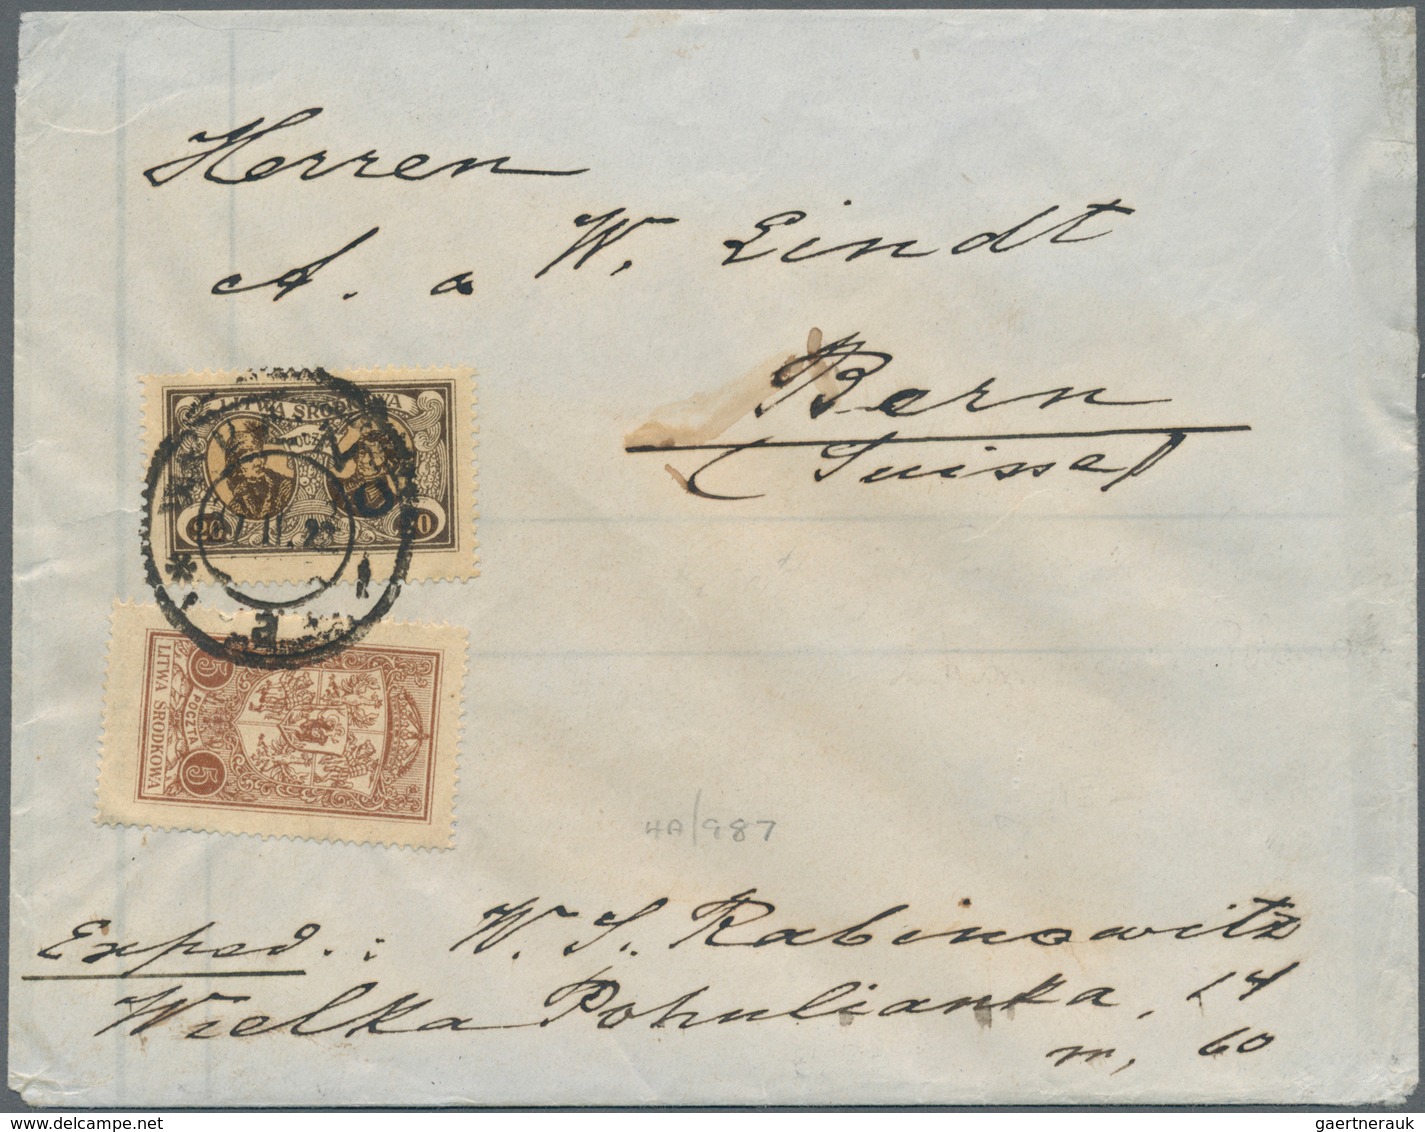 Mittellitauen: 1921, 20 M And 5 M Defintitives On Cover From "WILNO 27.II.22" To Bern, Suisse. - Lituanie